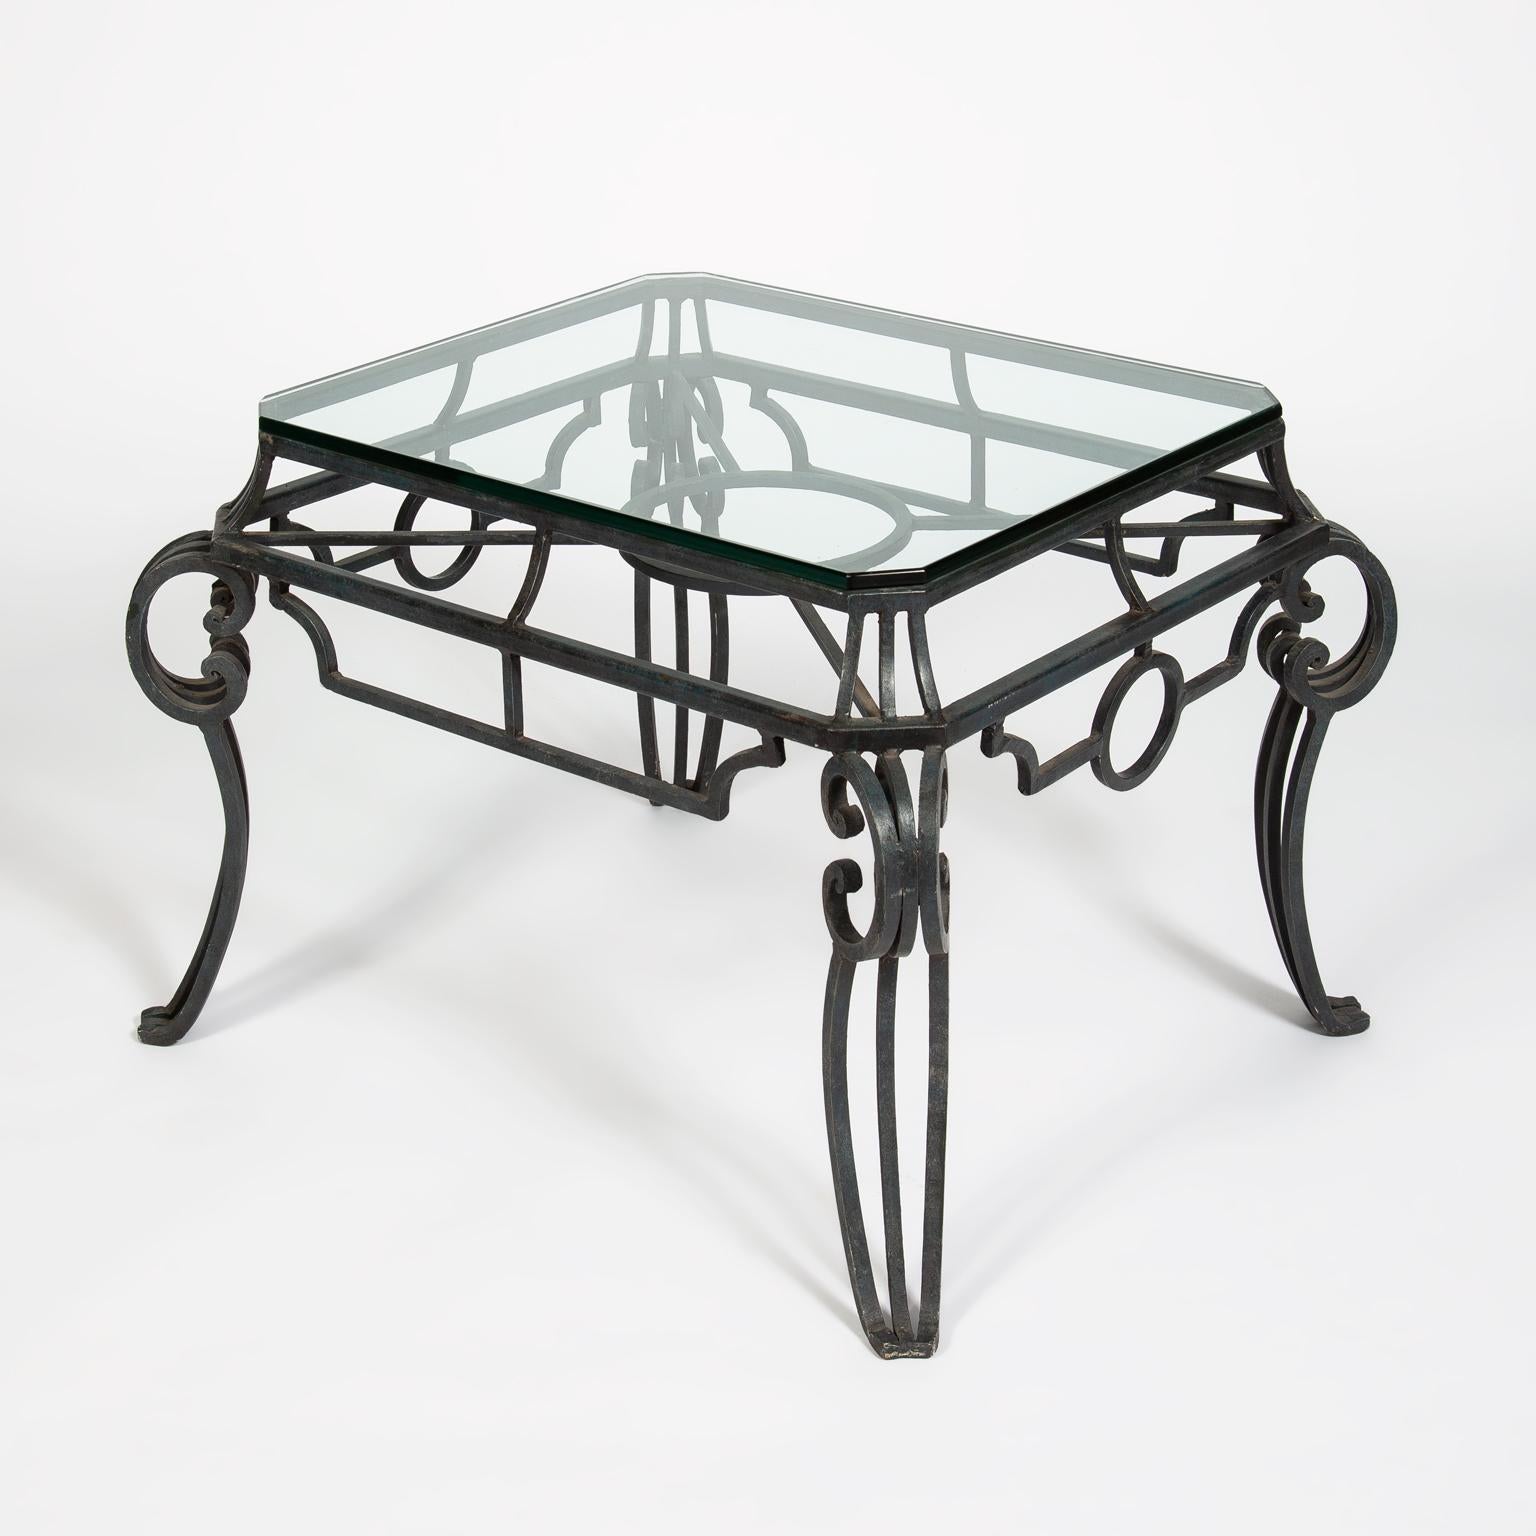 A pair of French midcentury wrought iron side tables with thick glass tops. The metal work has natural signs of patination from age.